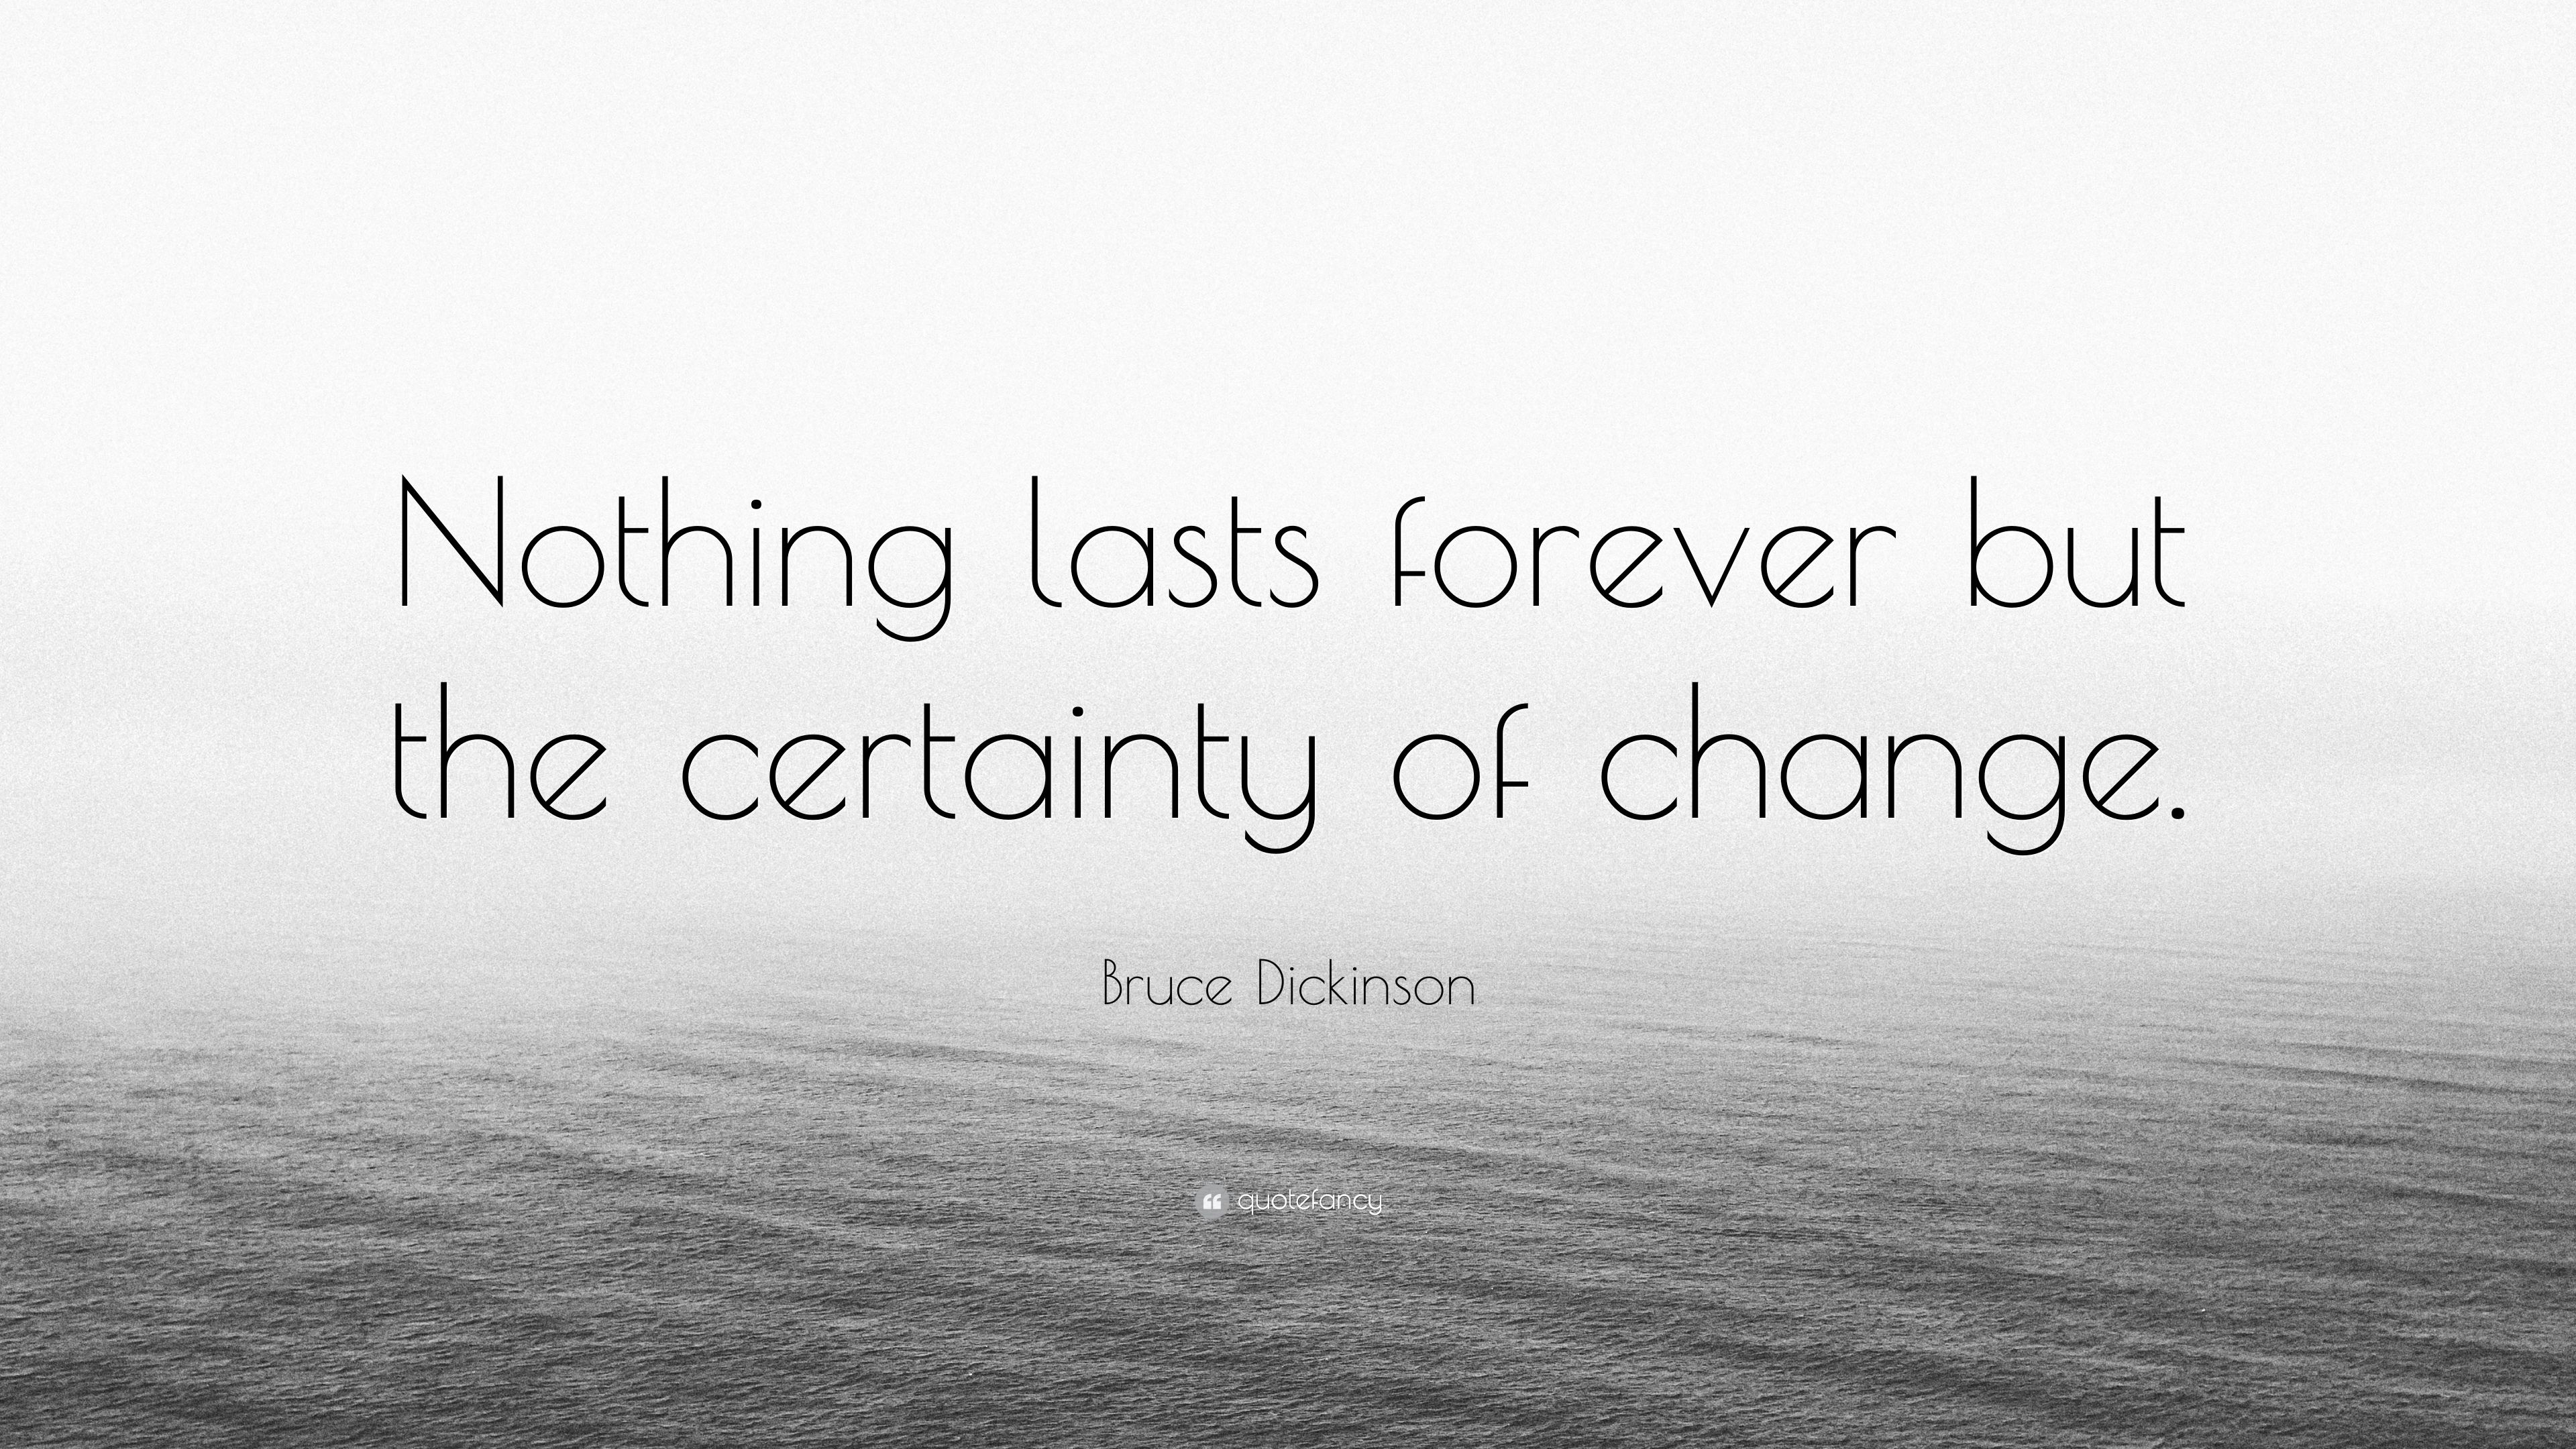 Bruce Dickinson Quote: “Nothing lasts forever but the certainty of change.” (7 wallpaper)